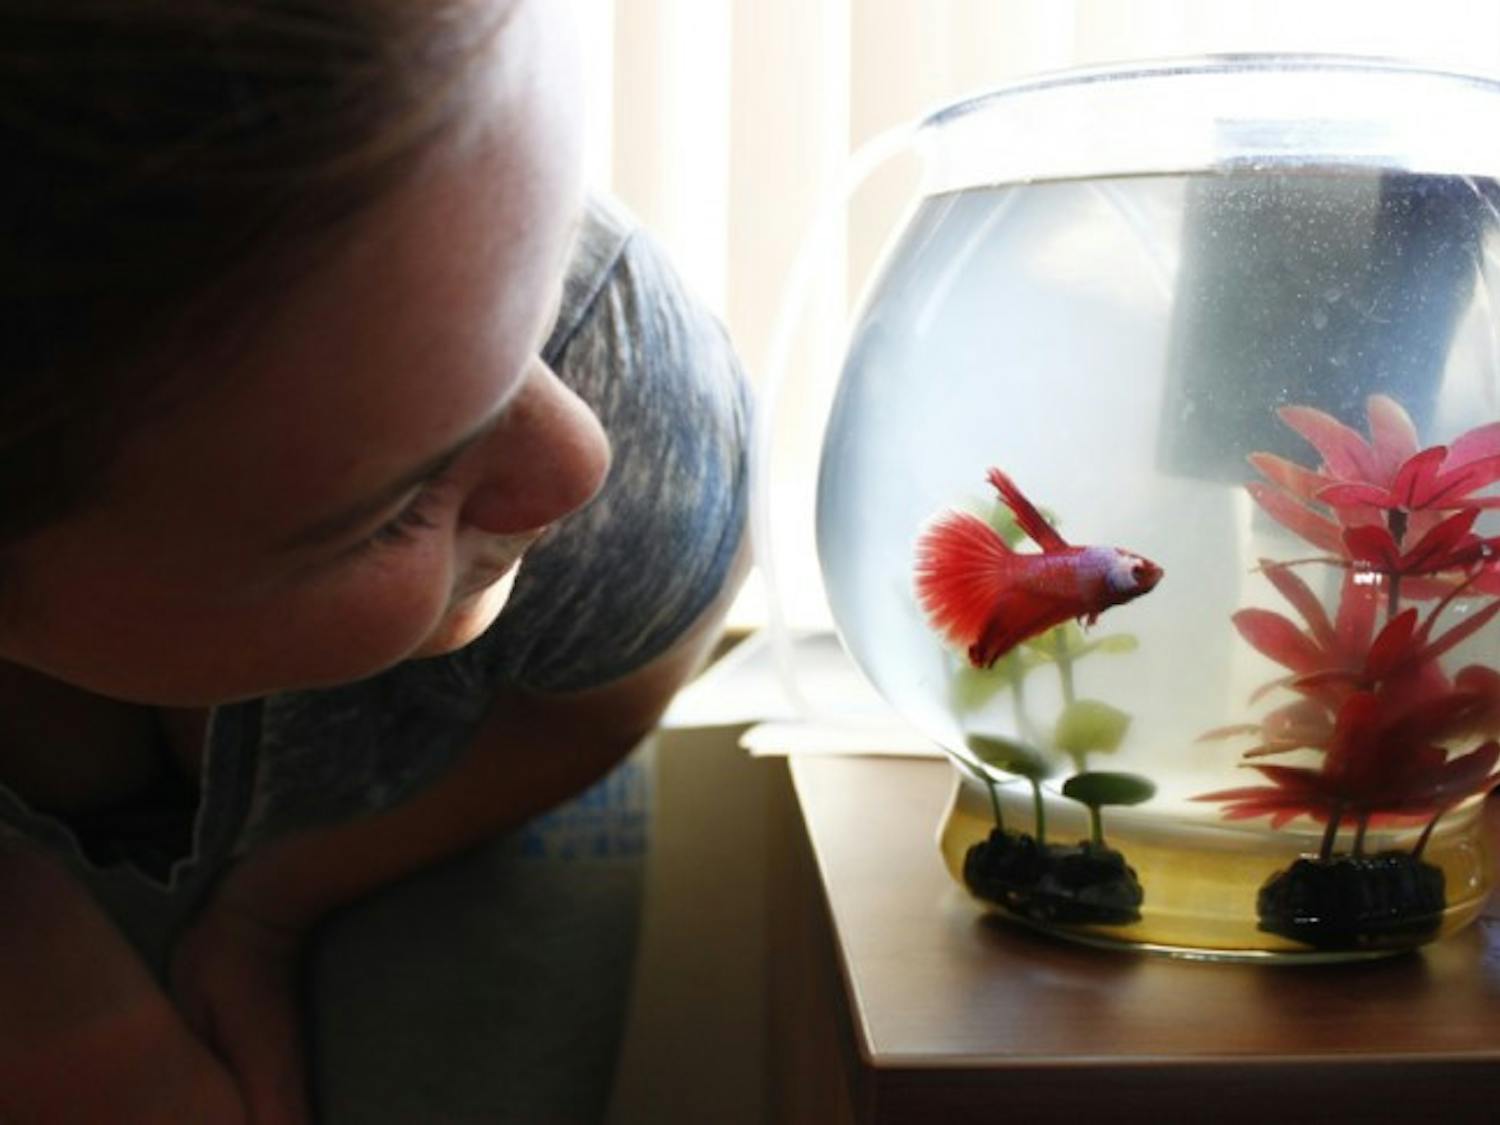 Animal sciences freshman Sierra Wilson, 18, looks at her Delta Tail Betta fish, Alexei, in her dorm room. She says it’s comforting having a pet in her dorm. “It reminds me of my dog at home,” Wilson said.